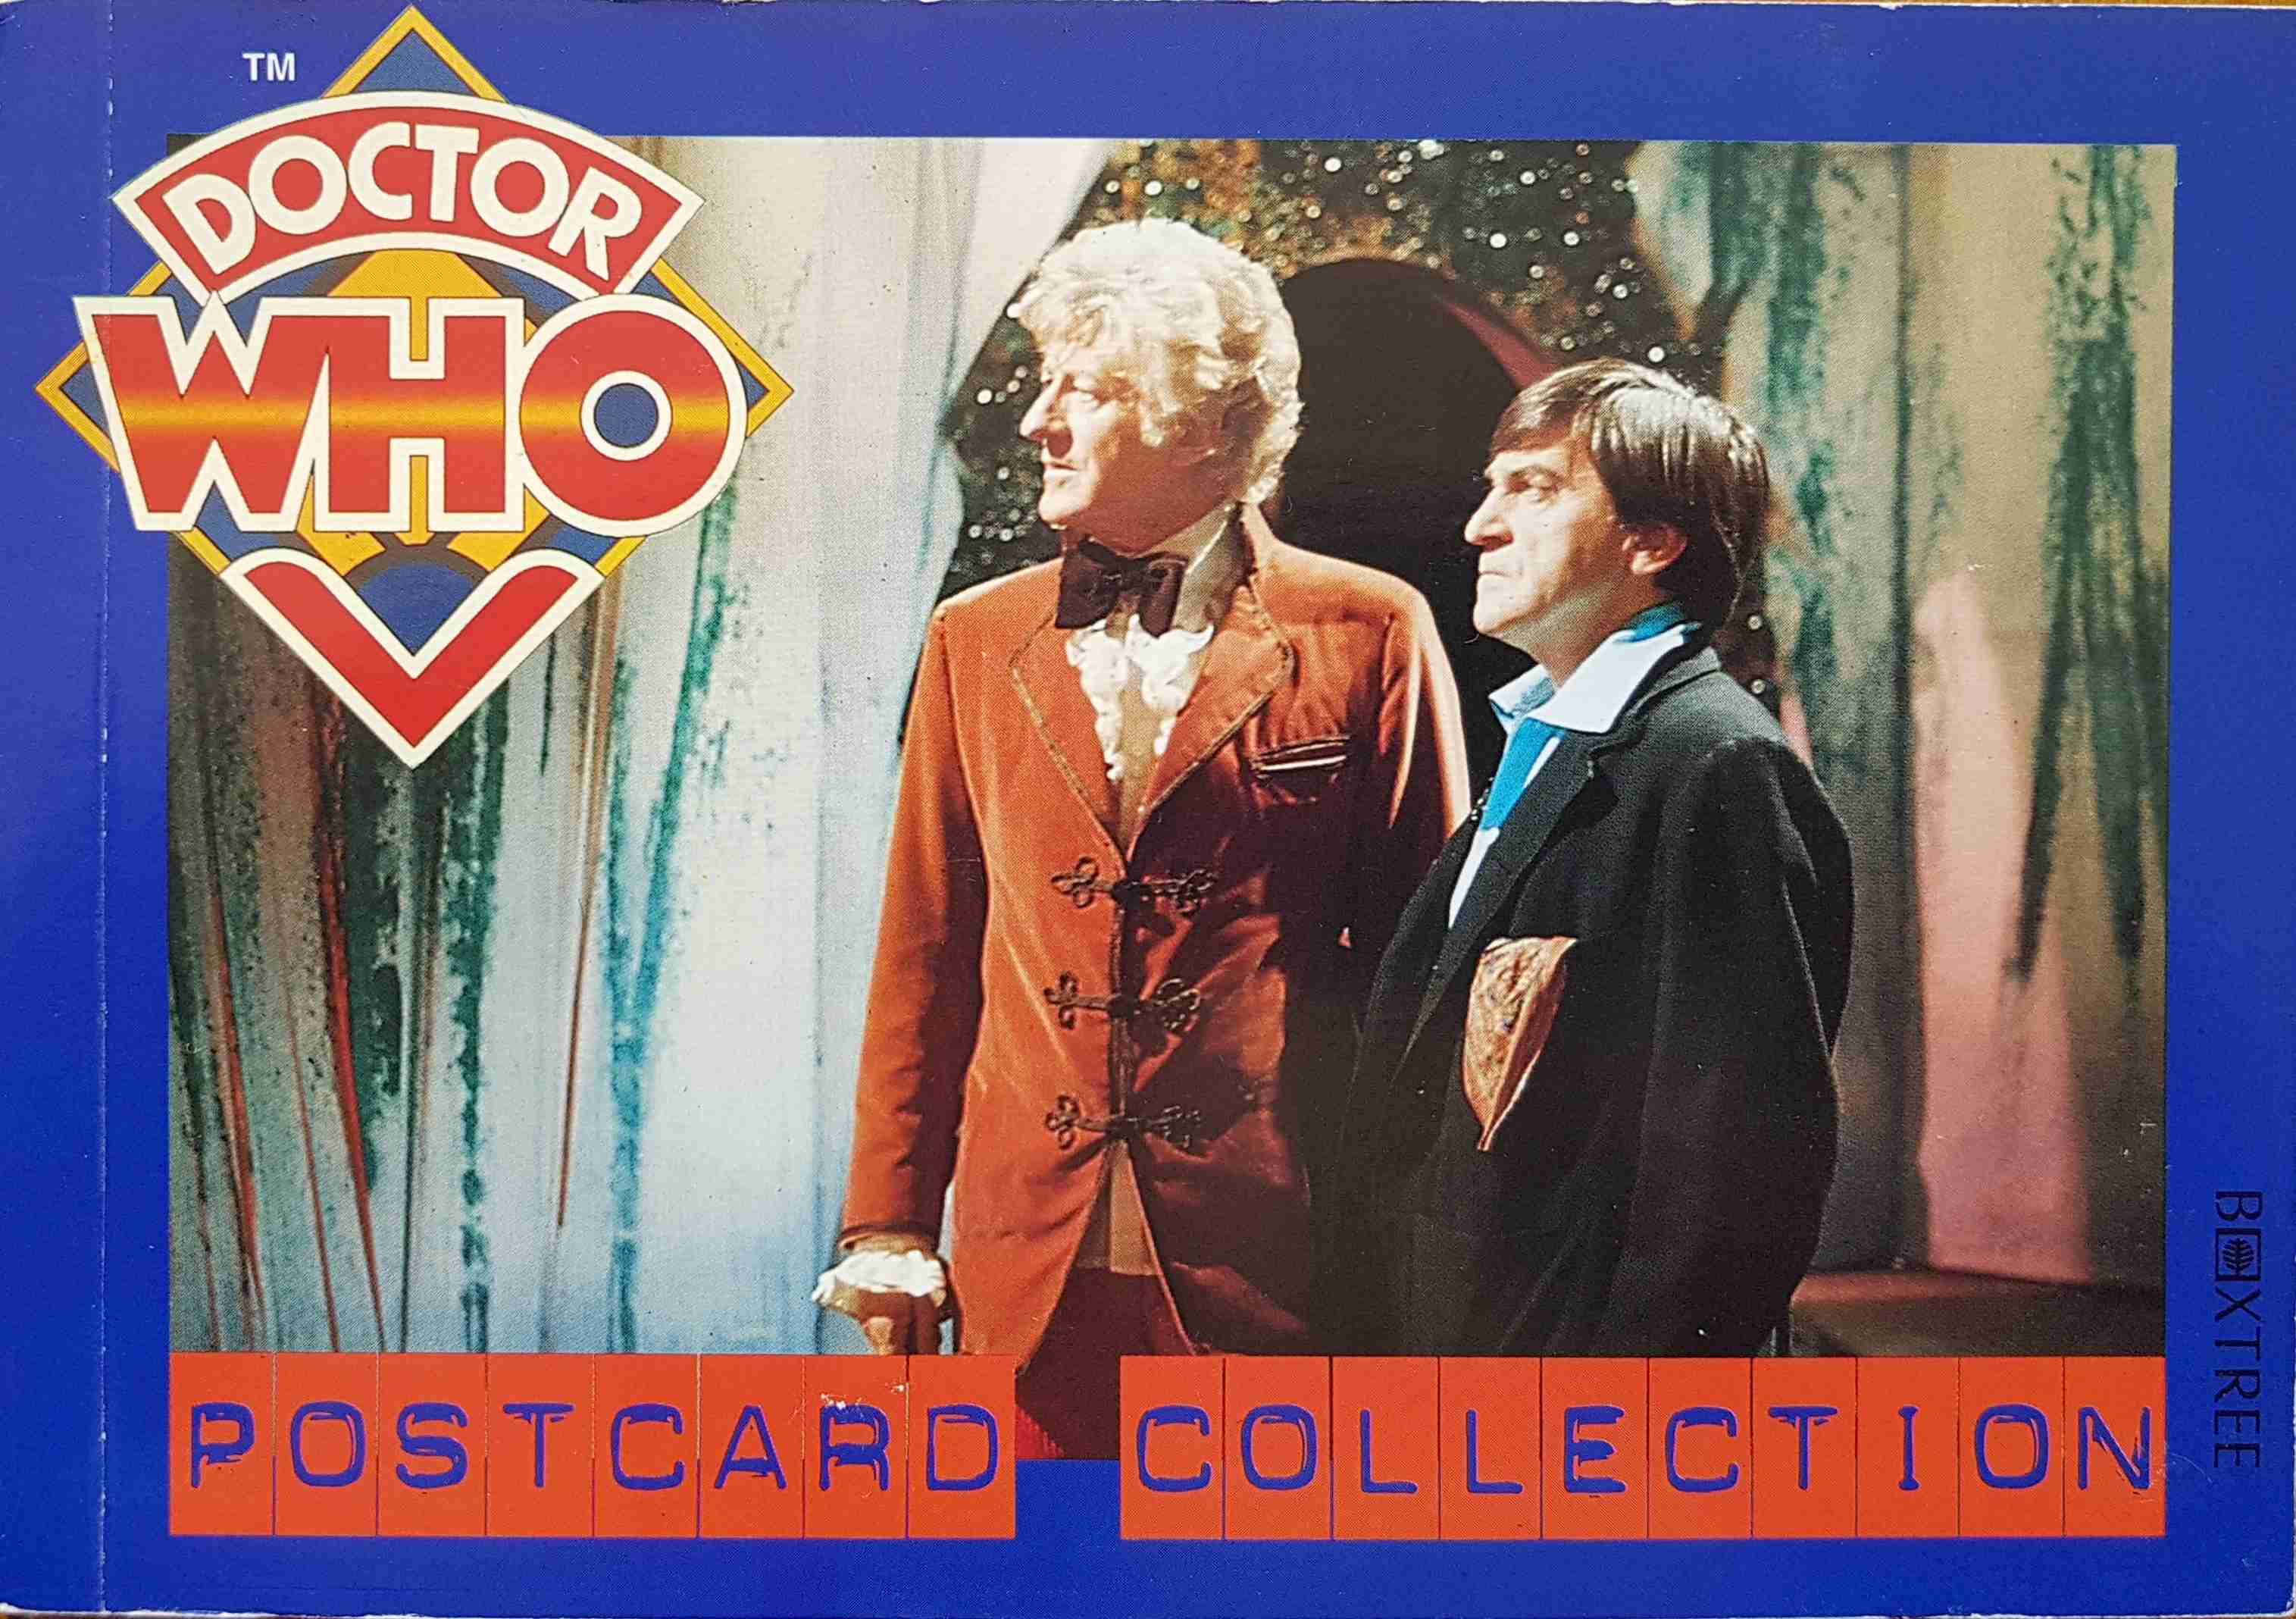 Picture of 0-7522-0731-8 Doctor Who - Postcard collection by artist Adrian Rigelsford from the BBC records and Tapes library